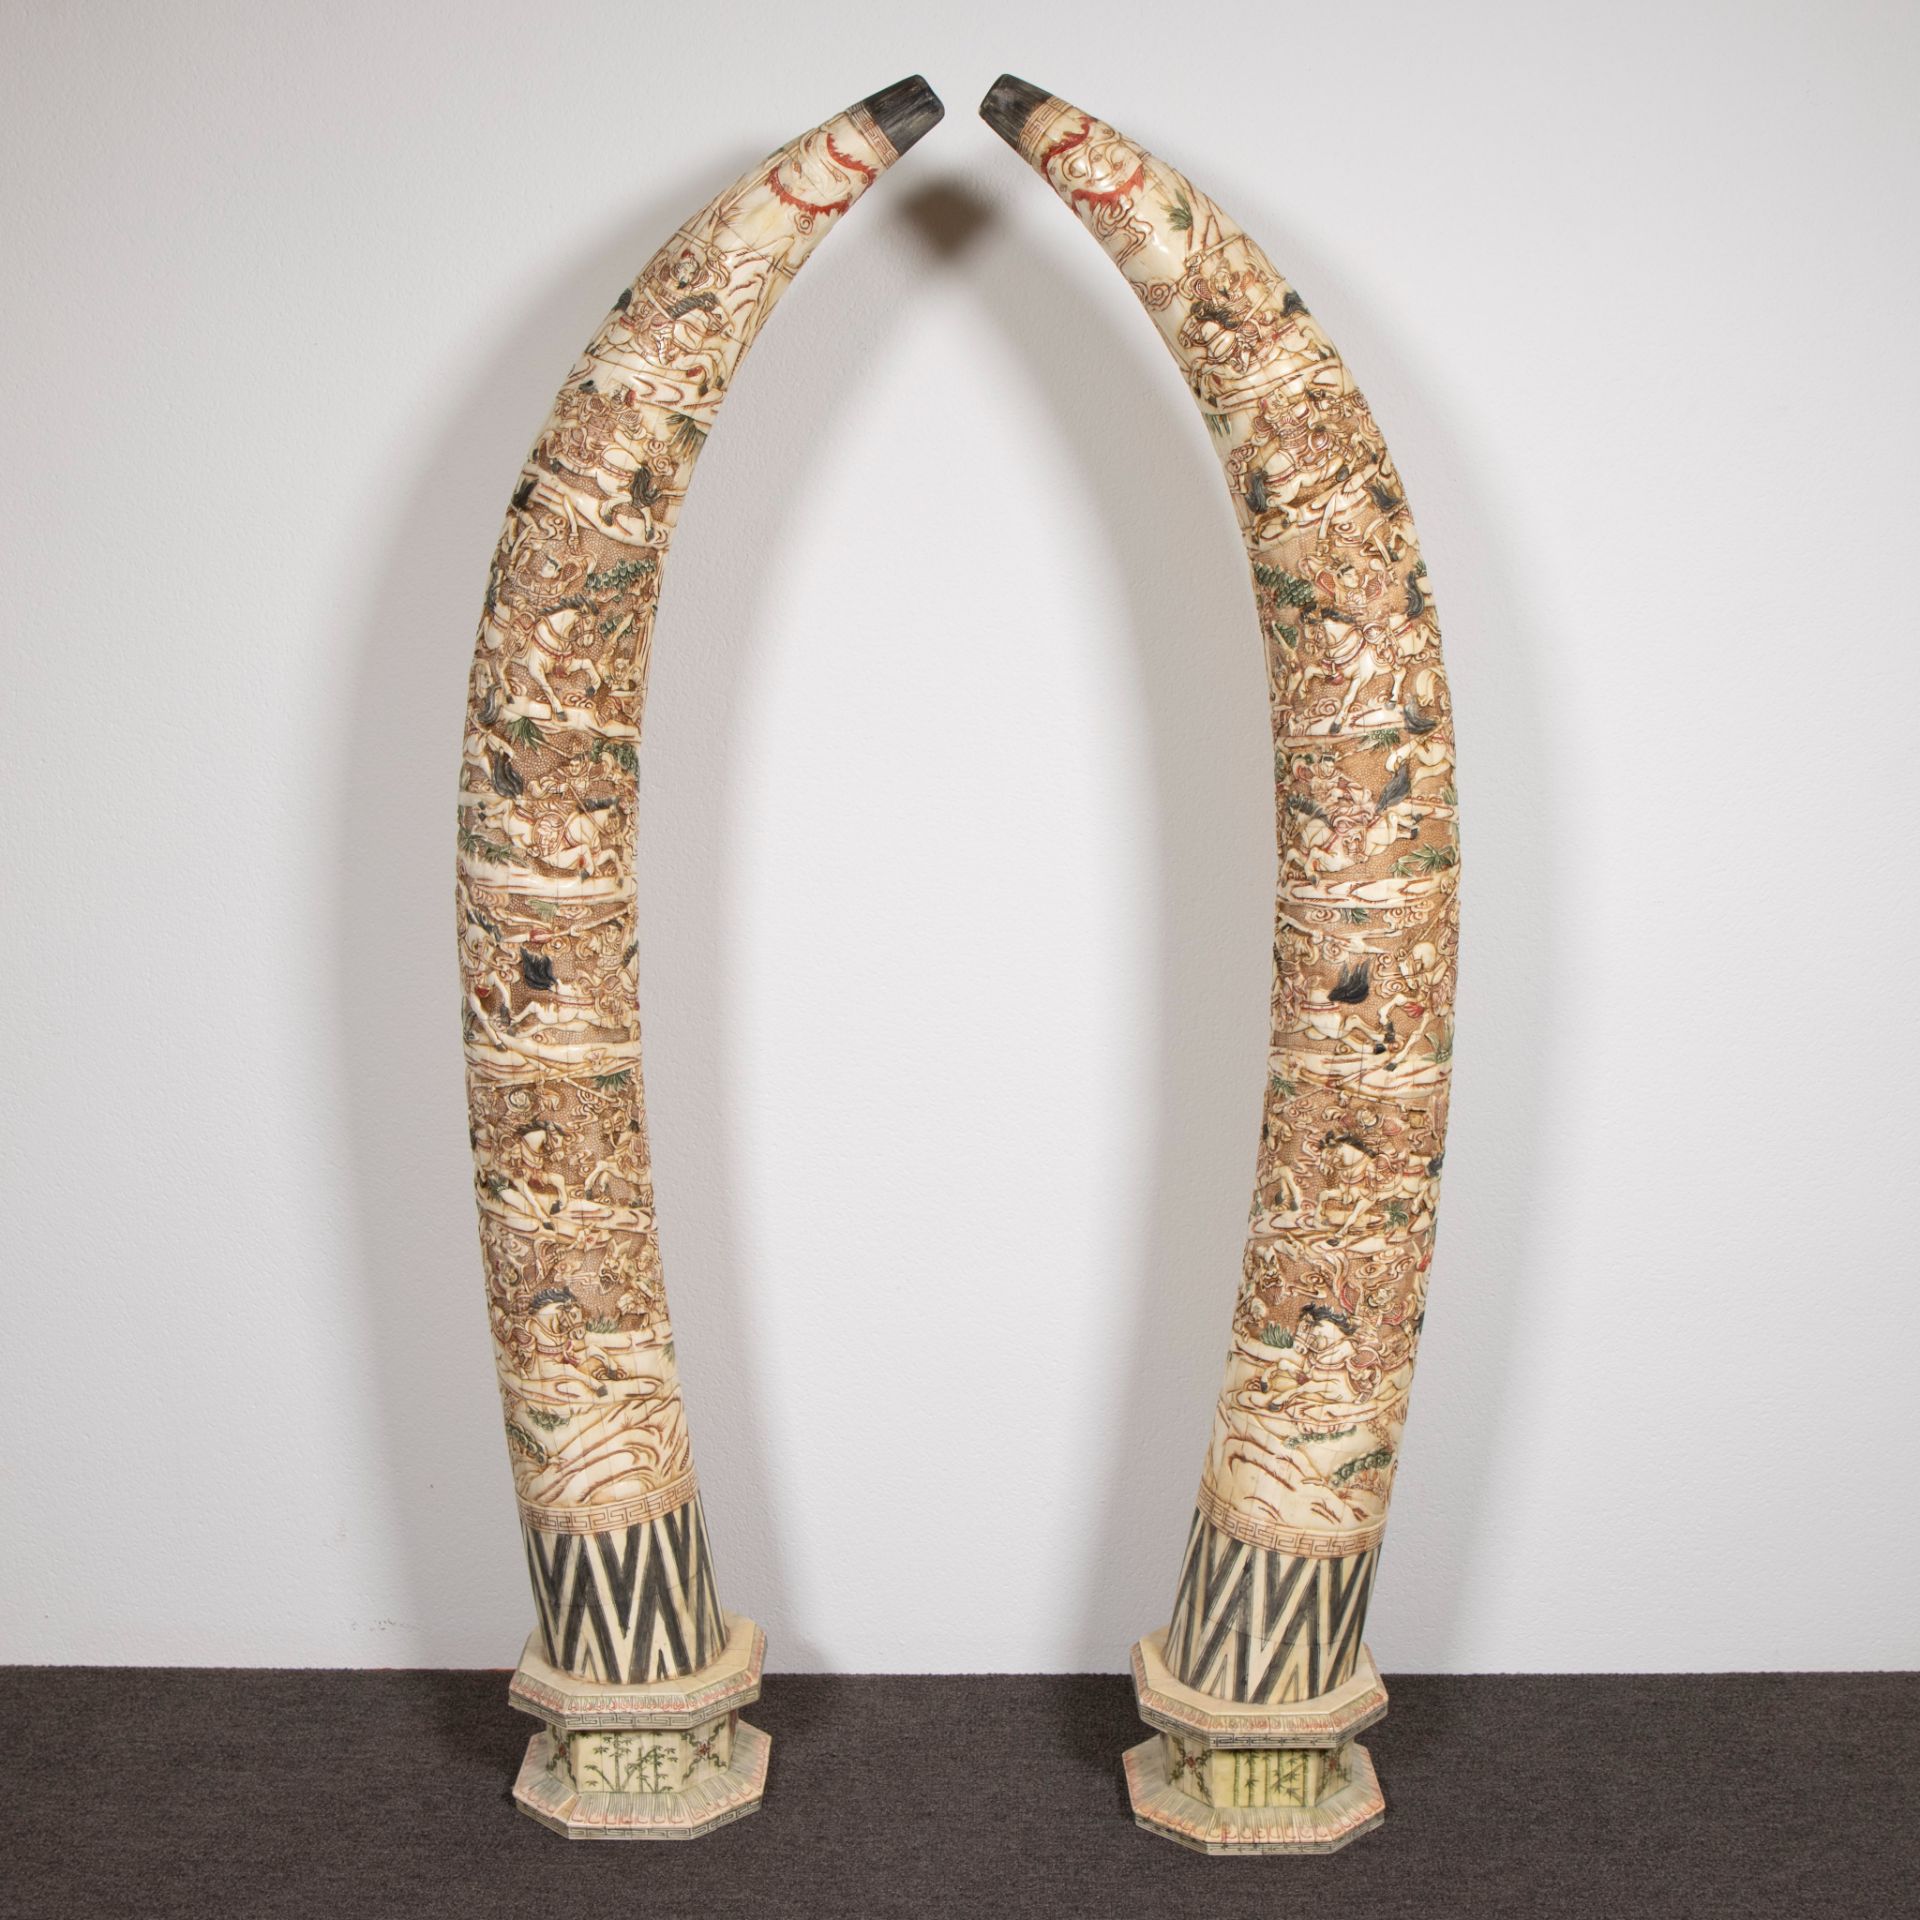 Exceptionally large pair of 'tusks' made of glued pieces of bone depicting battle scenes, circa 1890 - Image 3 of 4